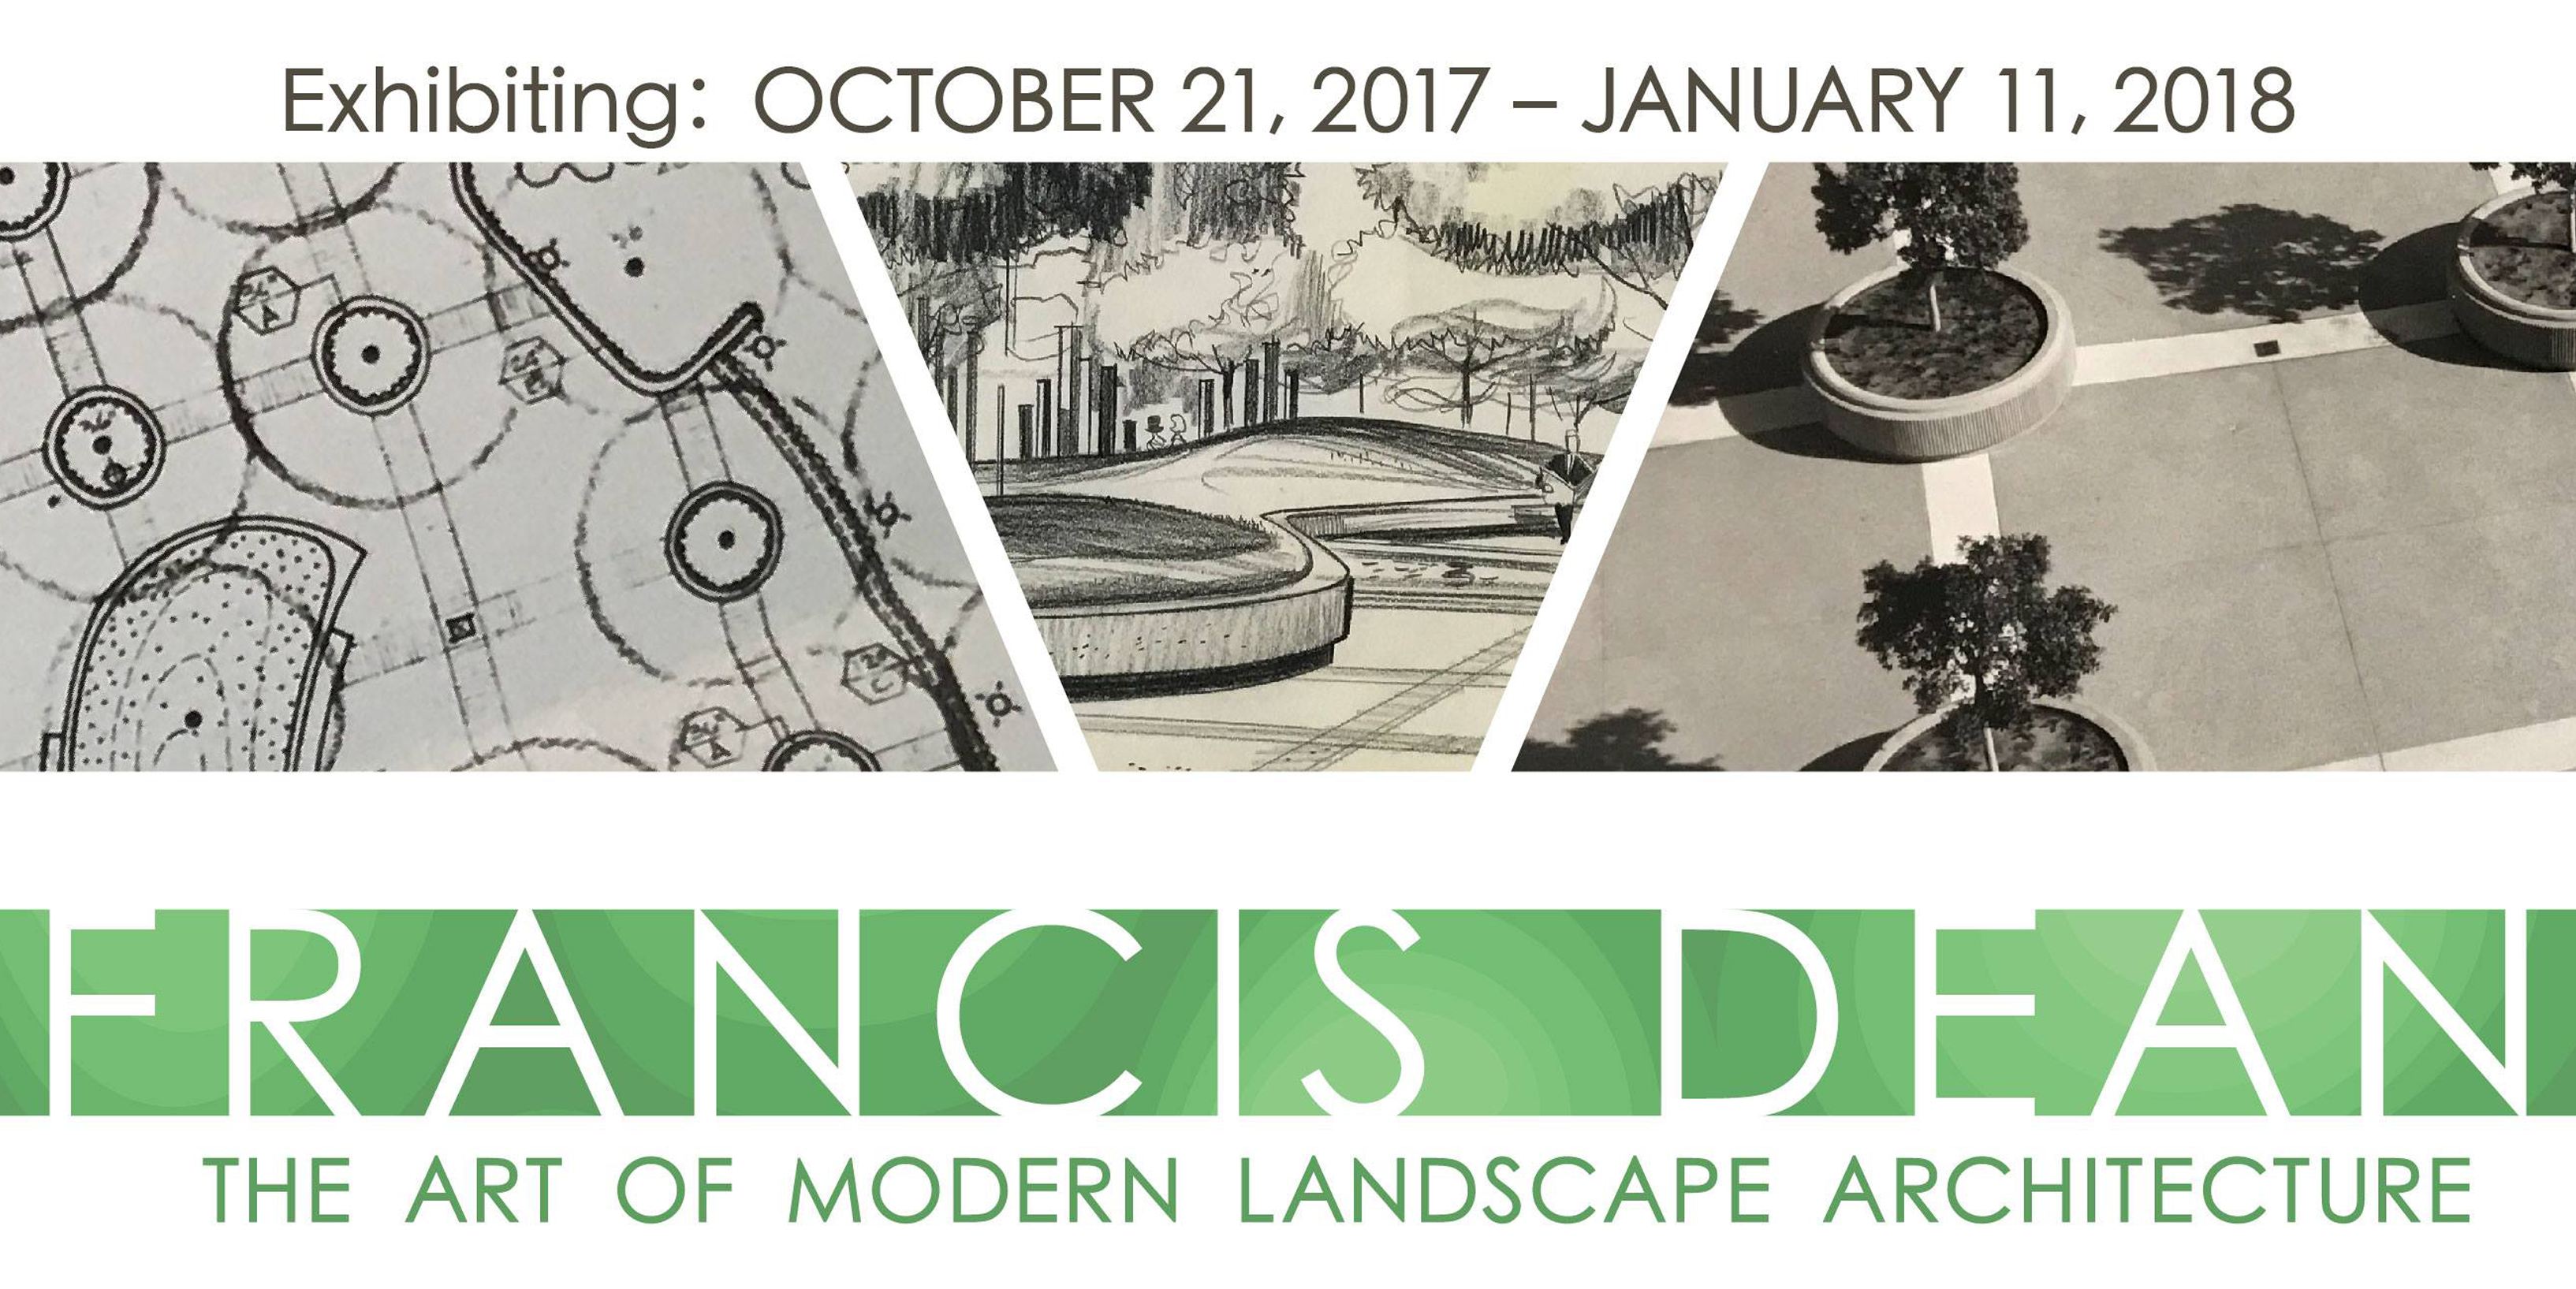 Francis Dean and the Art of Modern Landscape Architecture